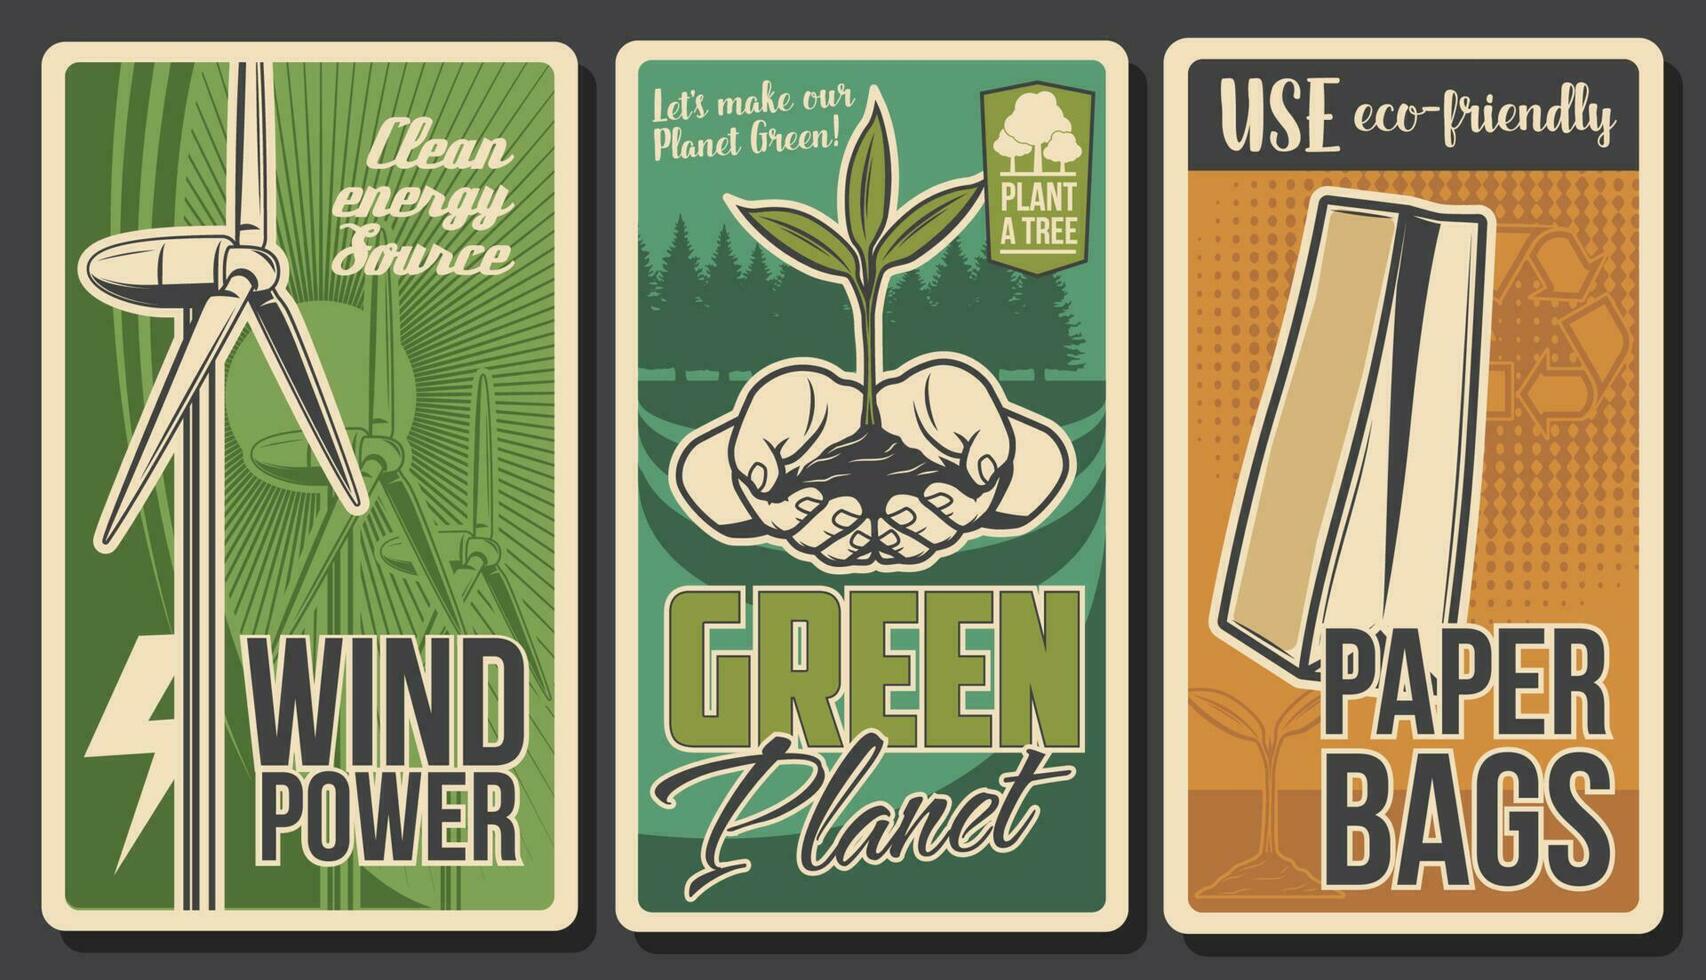 Ecology, green energy, environment, nature banners vector